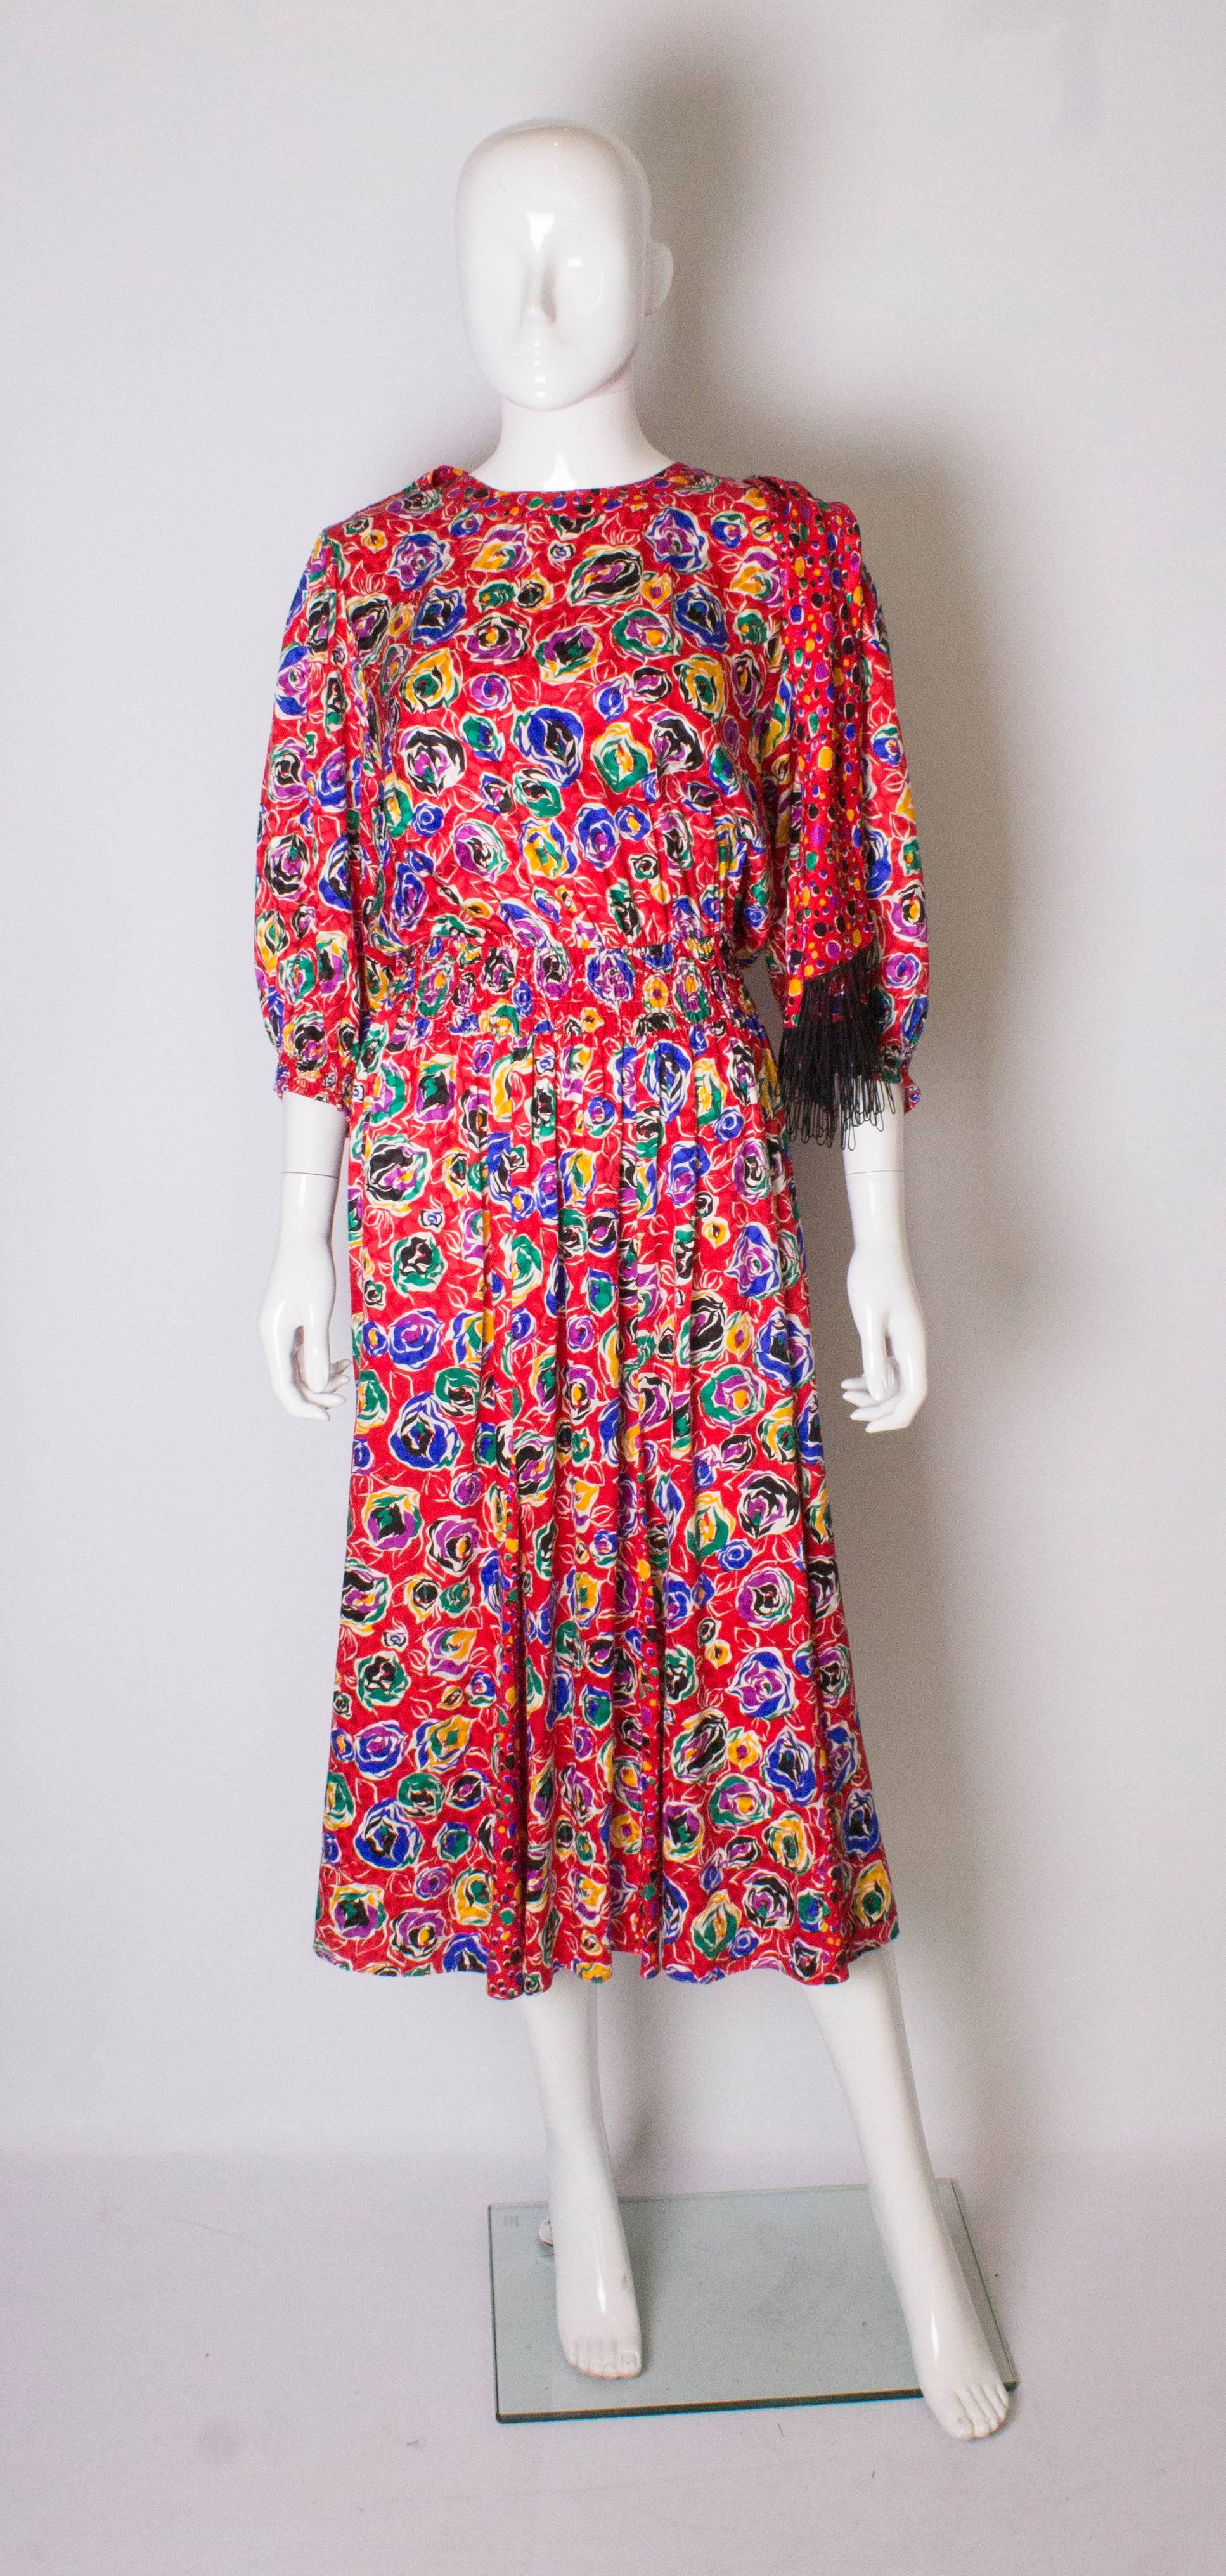 An easy to wear dress by Kanga /Dale Tyron. The dress has a red background with a multi-coloured abstract floral print. It has a round neckline. elbow length sleeves and an elasticated waist.   There are panels at the lower skirt, so the dress